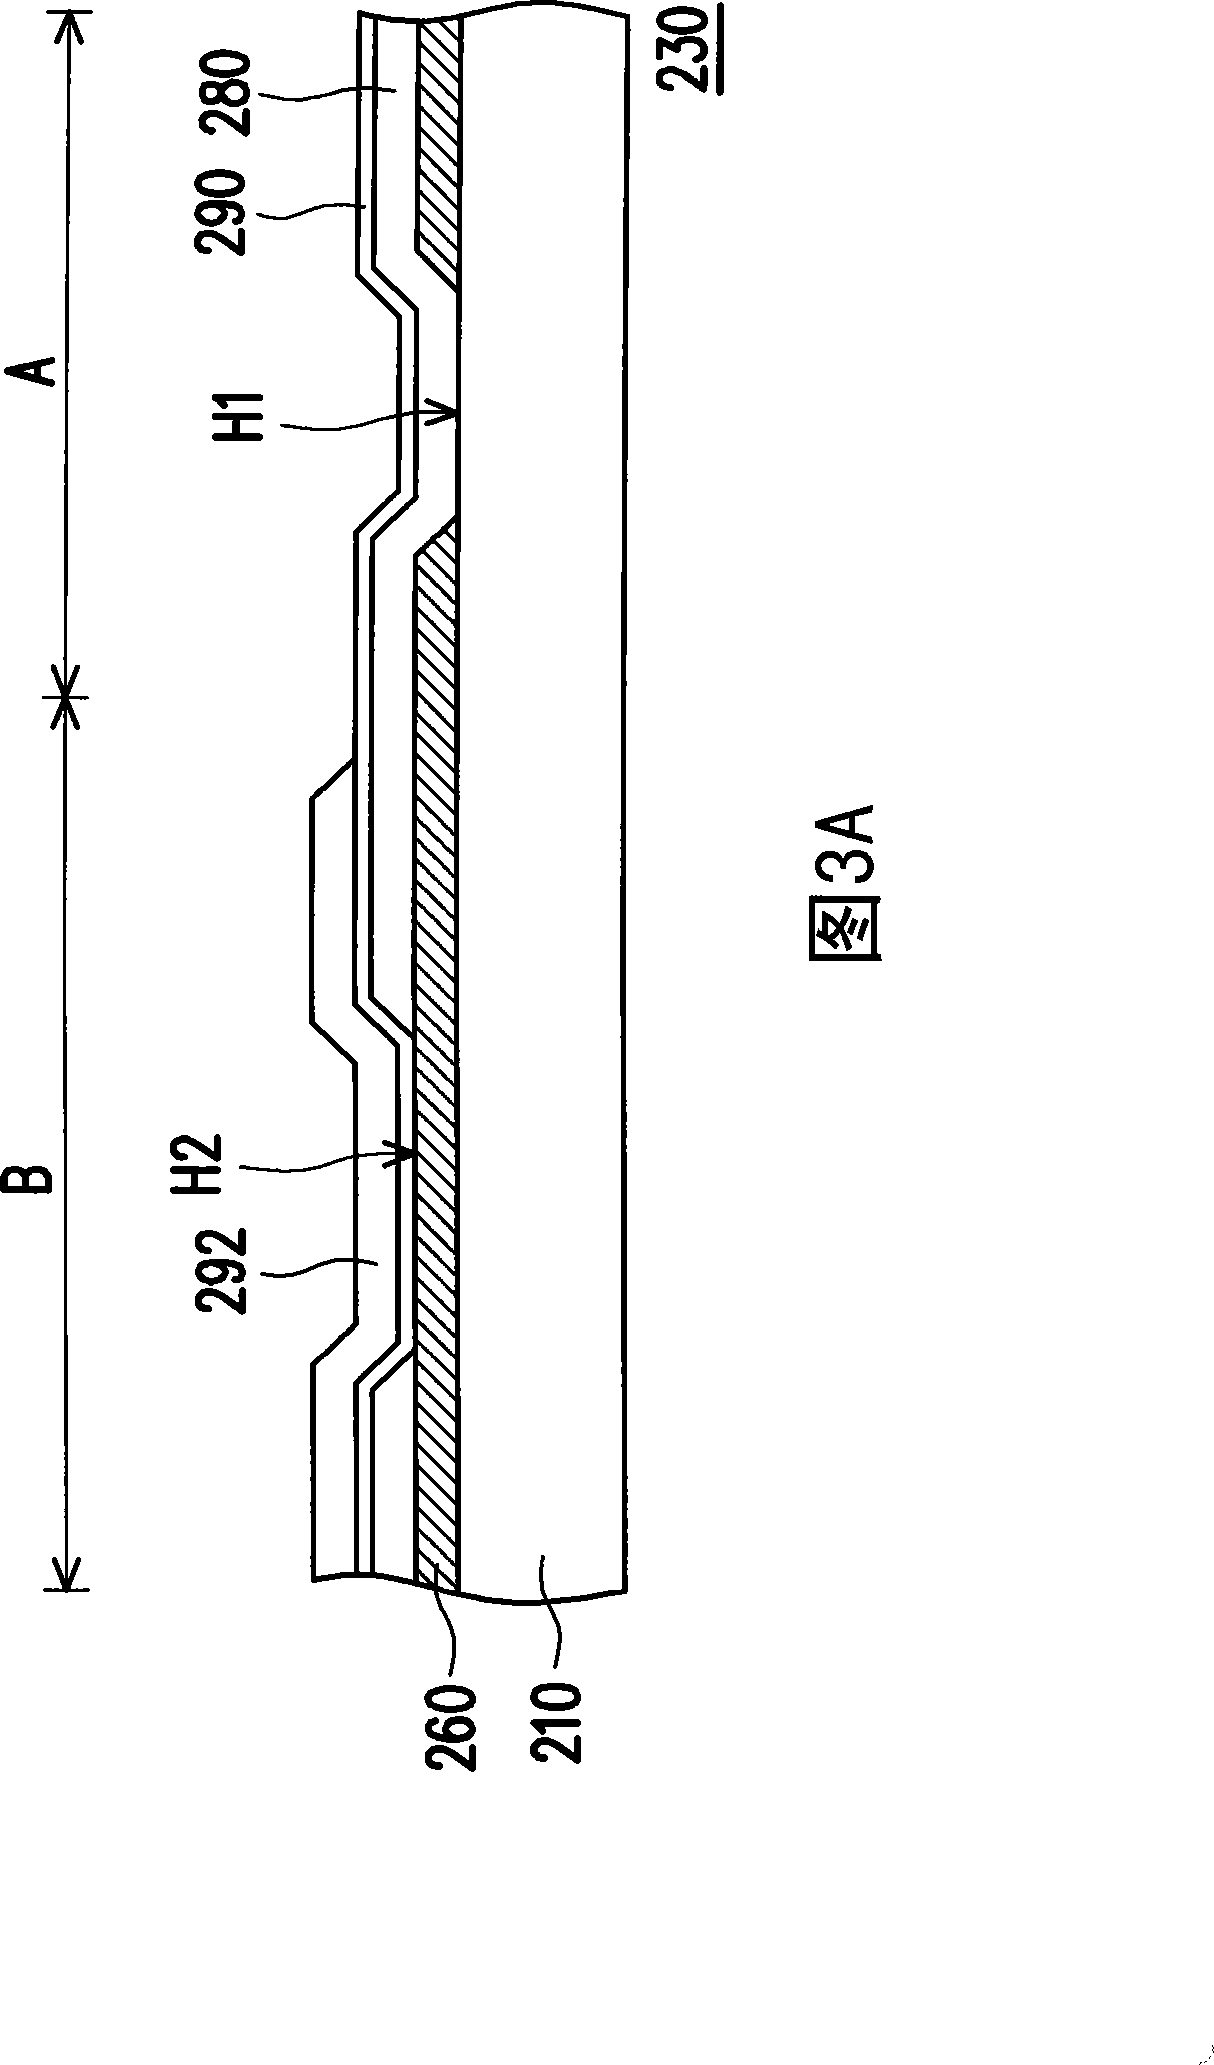 Active part array base plate and LCD panel